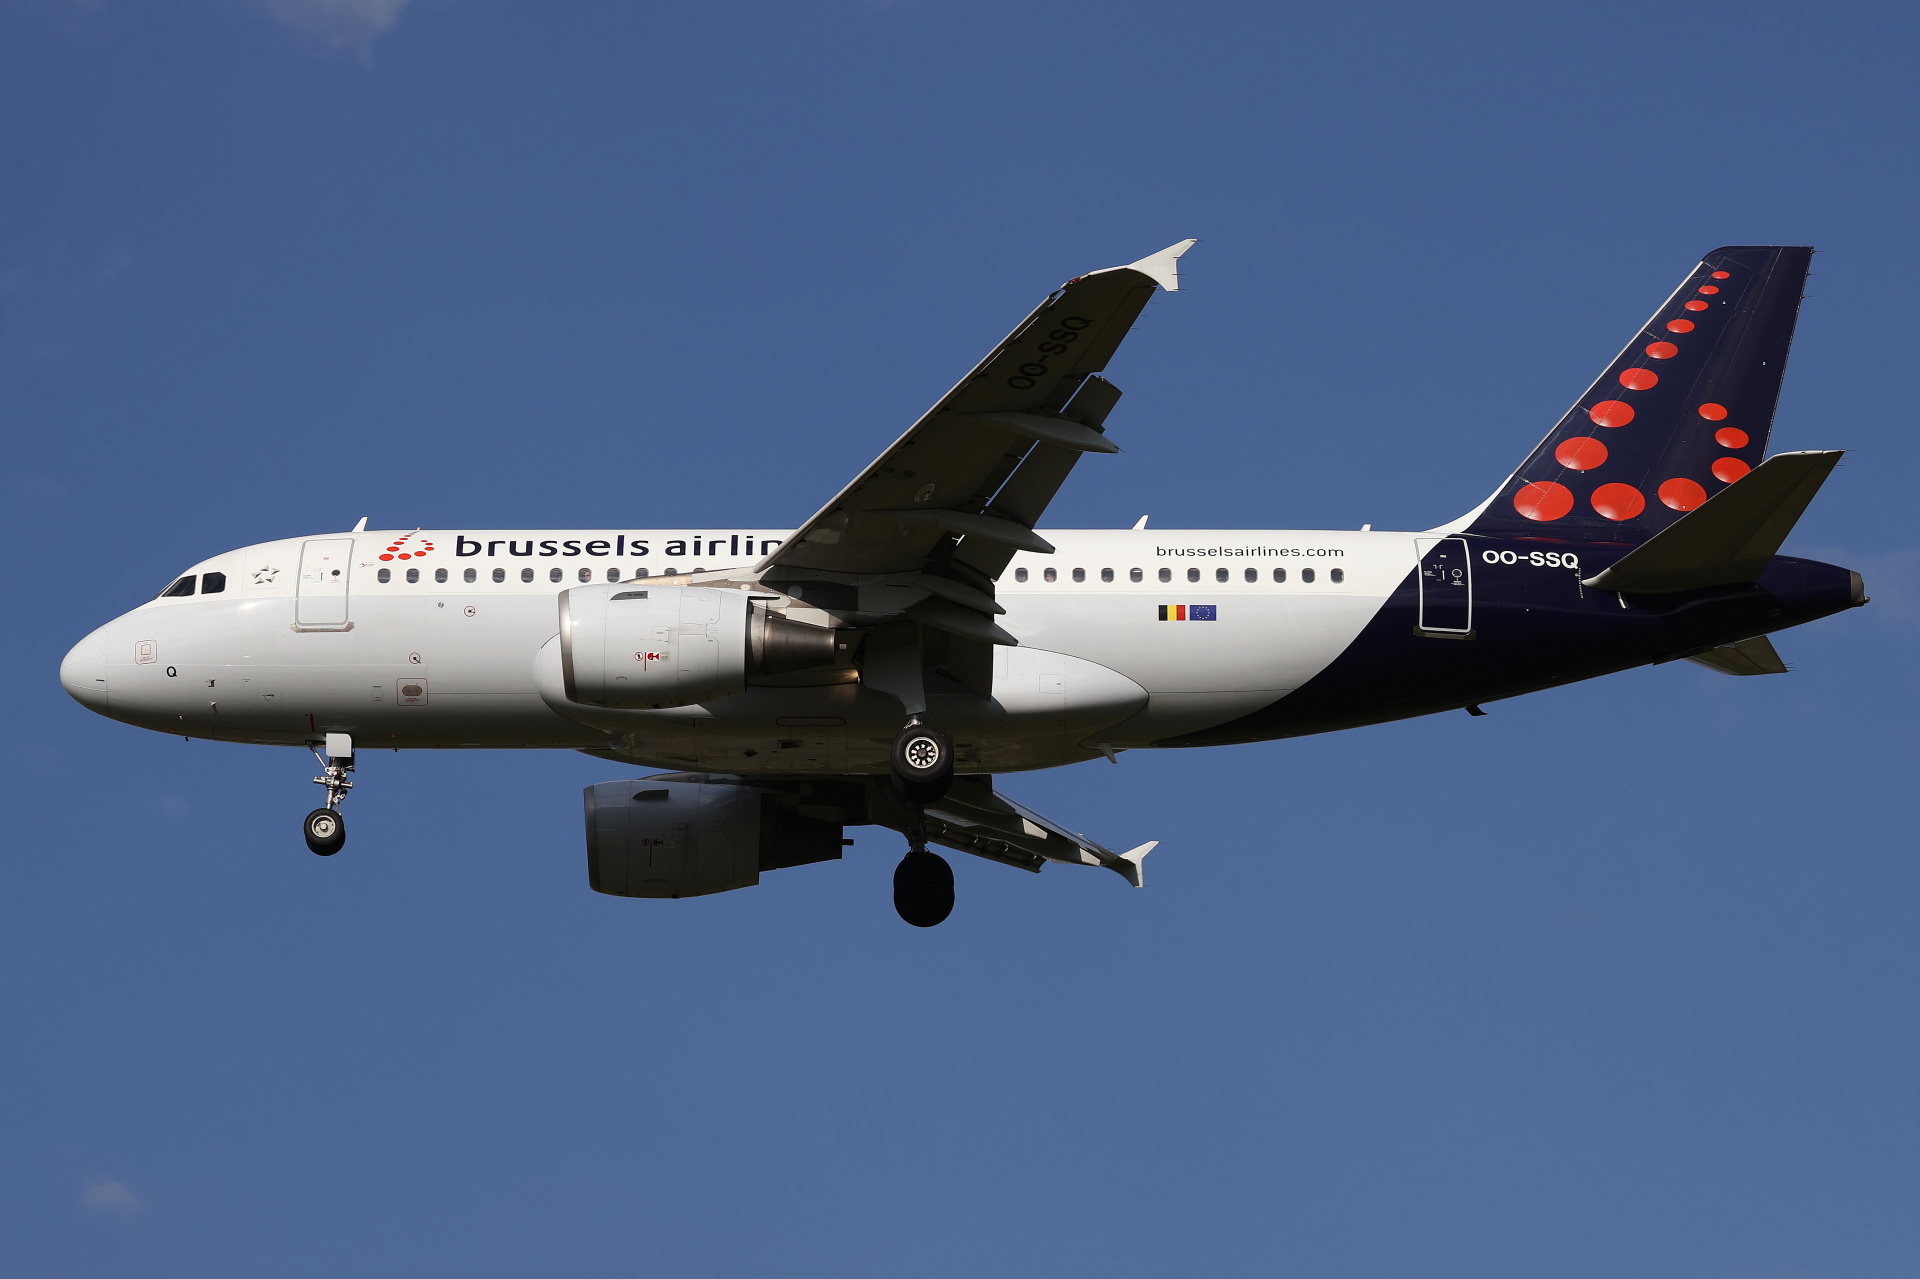 OO-SSQ (Aircraft » EPWA Spotting » Airbus A319-100 » Brussels Airlines)